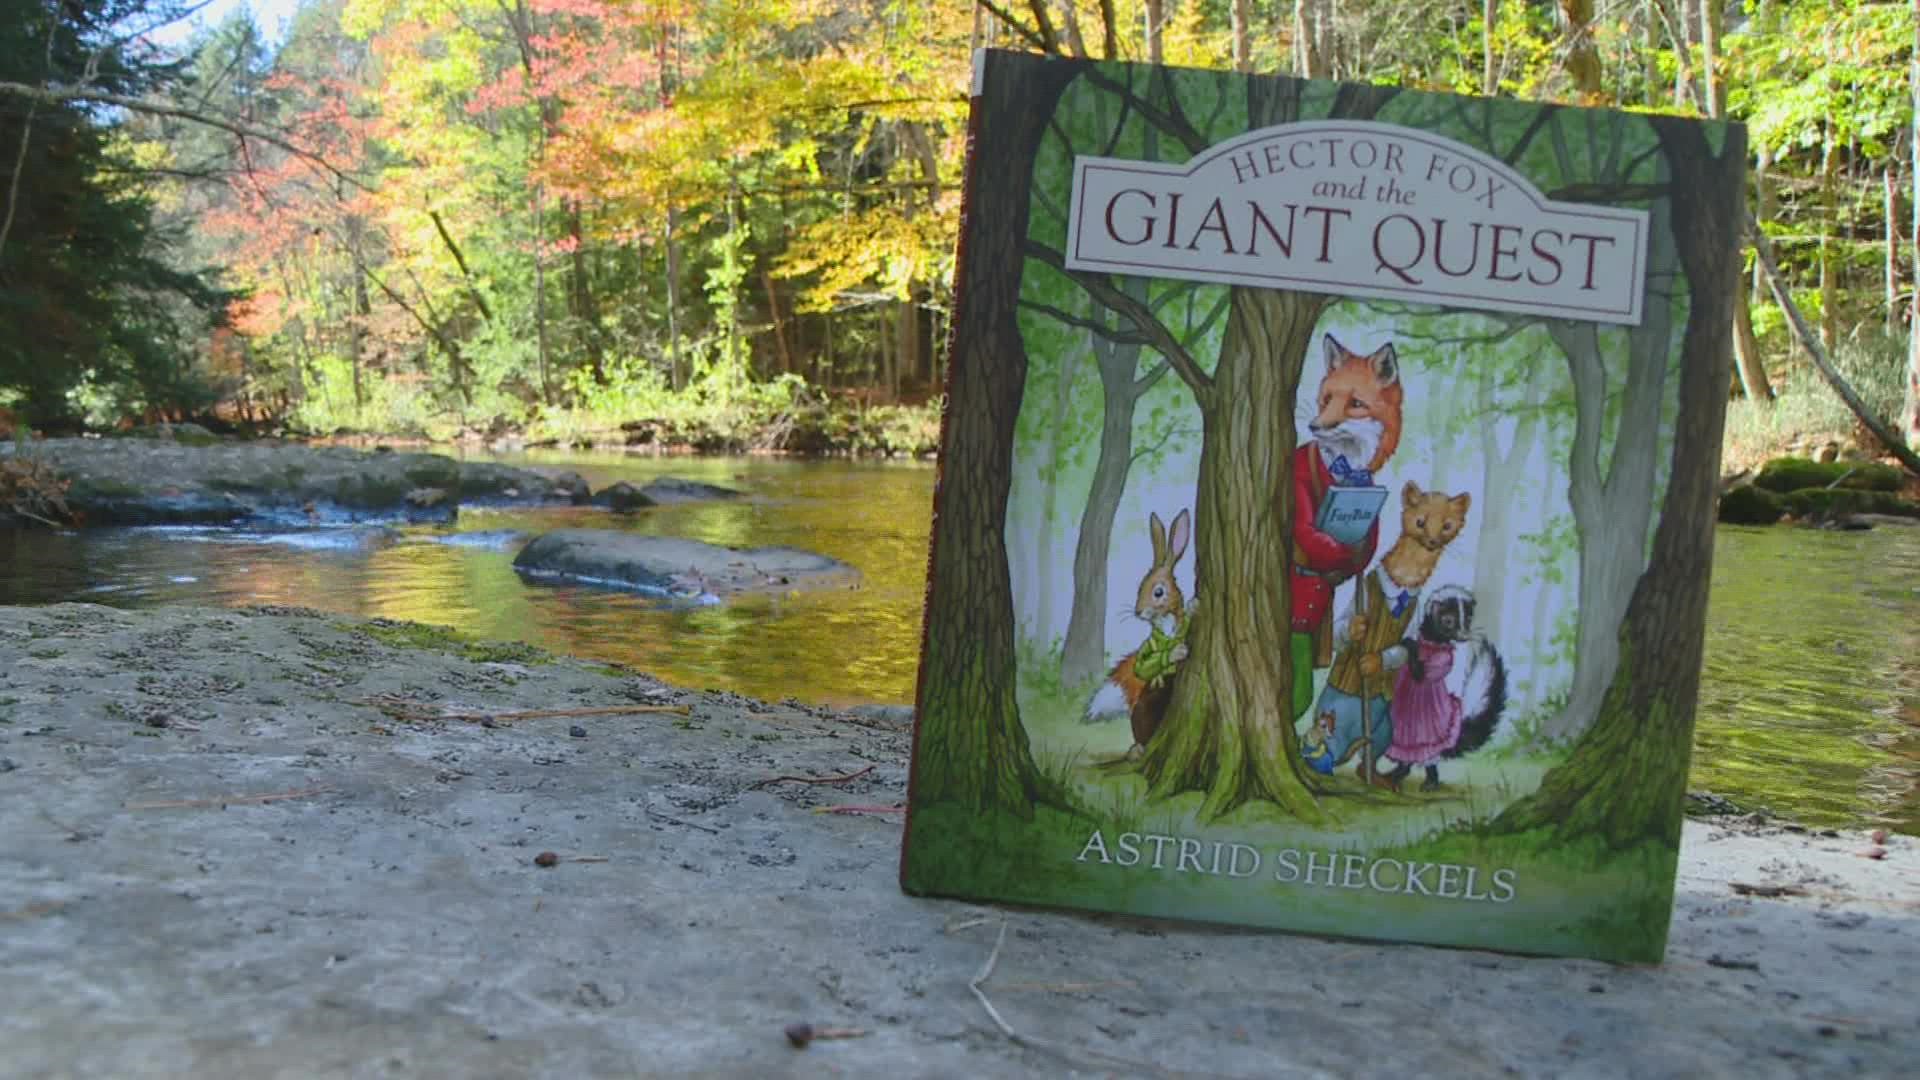 New England illustrator, Astrid Sheckels, talks about bringing woodland characters to life in a new children's book called Hector Fox.